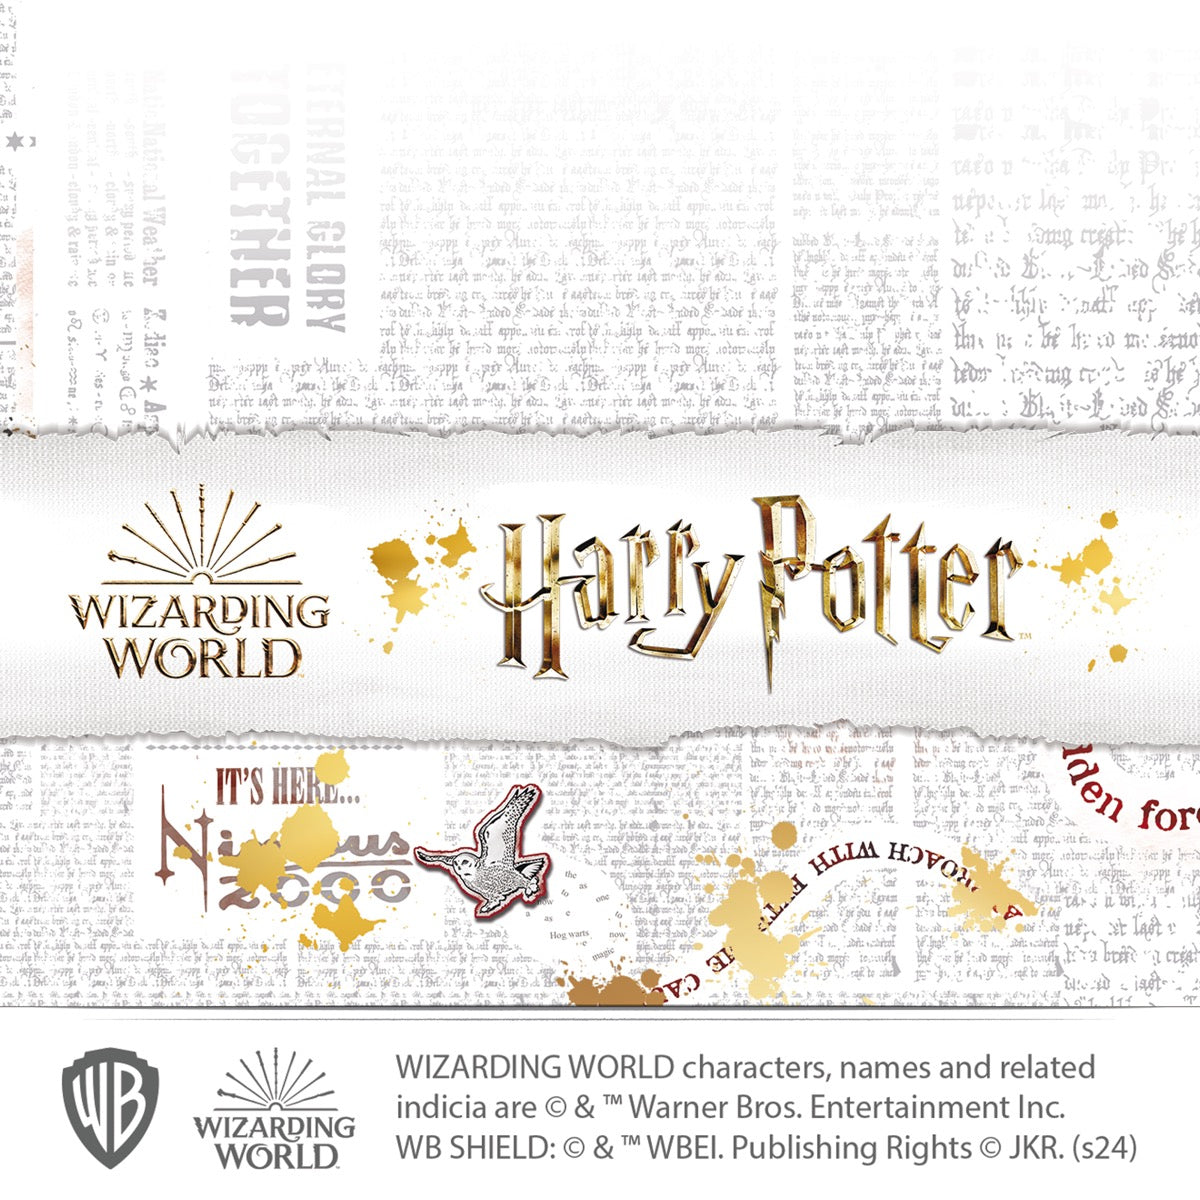 HARRY POTTER Wall Sticker – Waiting For My Hogwarts Letter Wall Decal Wizarding World Art